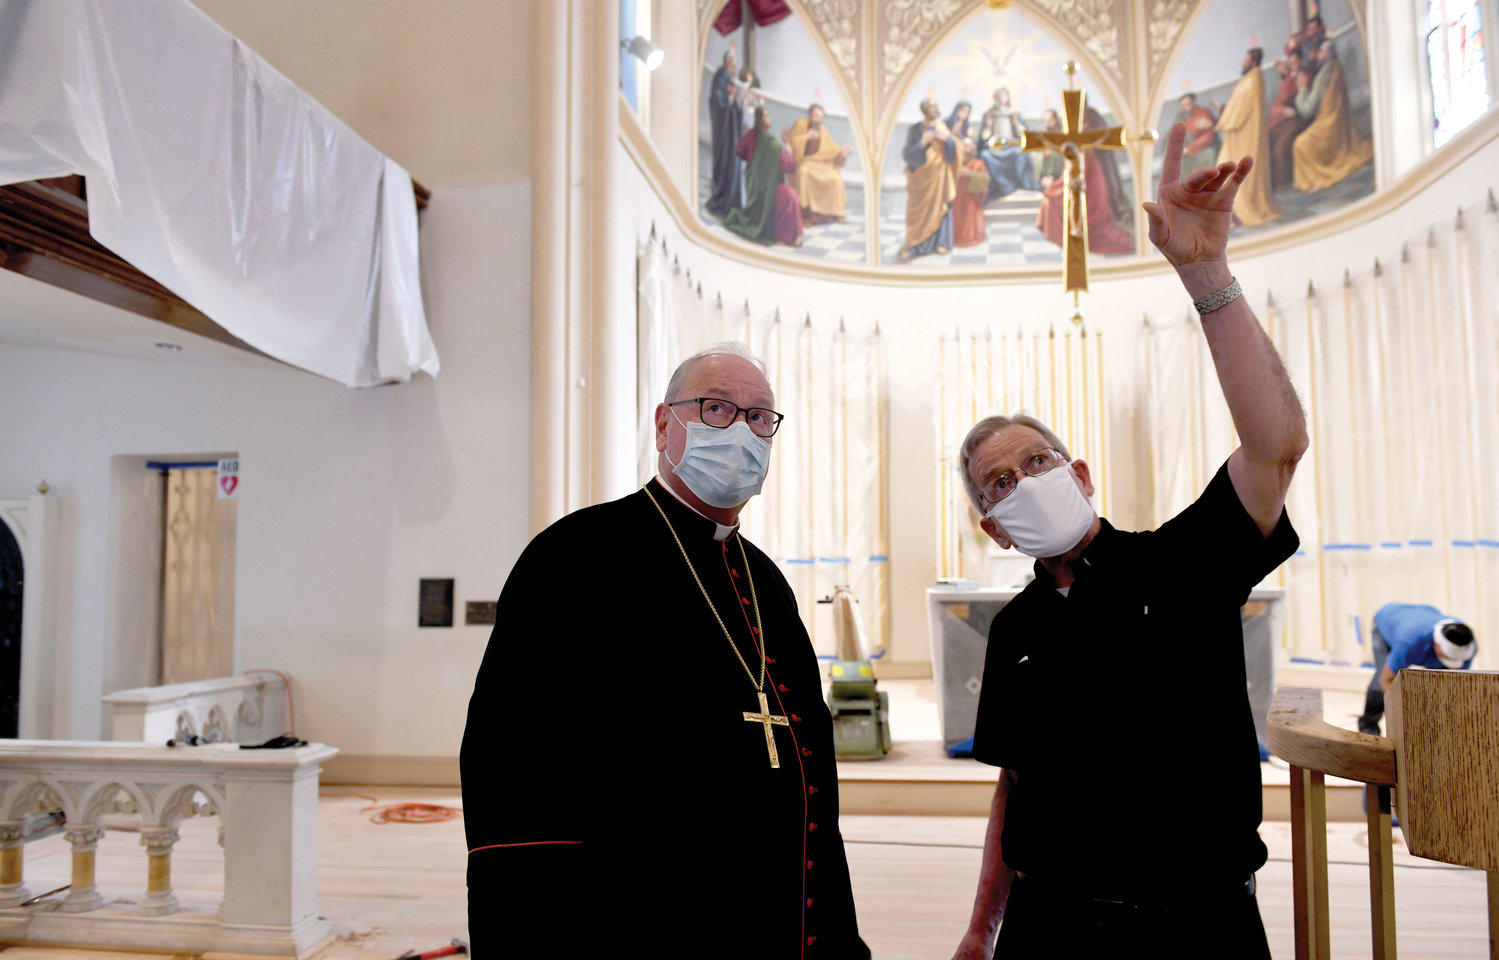 Father Thomas Madden, pastor of St. Peter and St. Mary of the Assumption parish, gives Cardinal Dolan a tour of the parish church, which is being renovated.